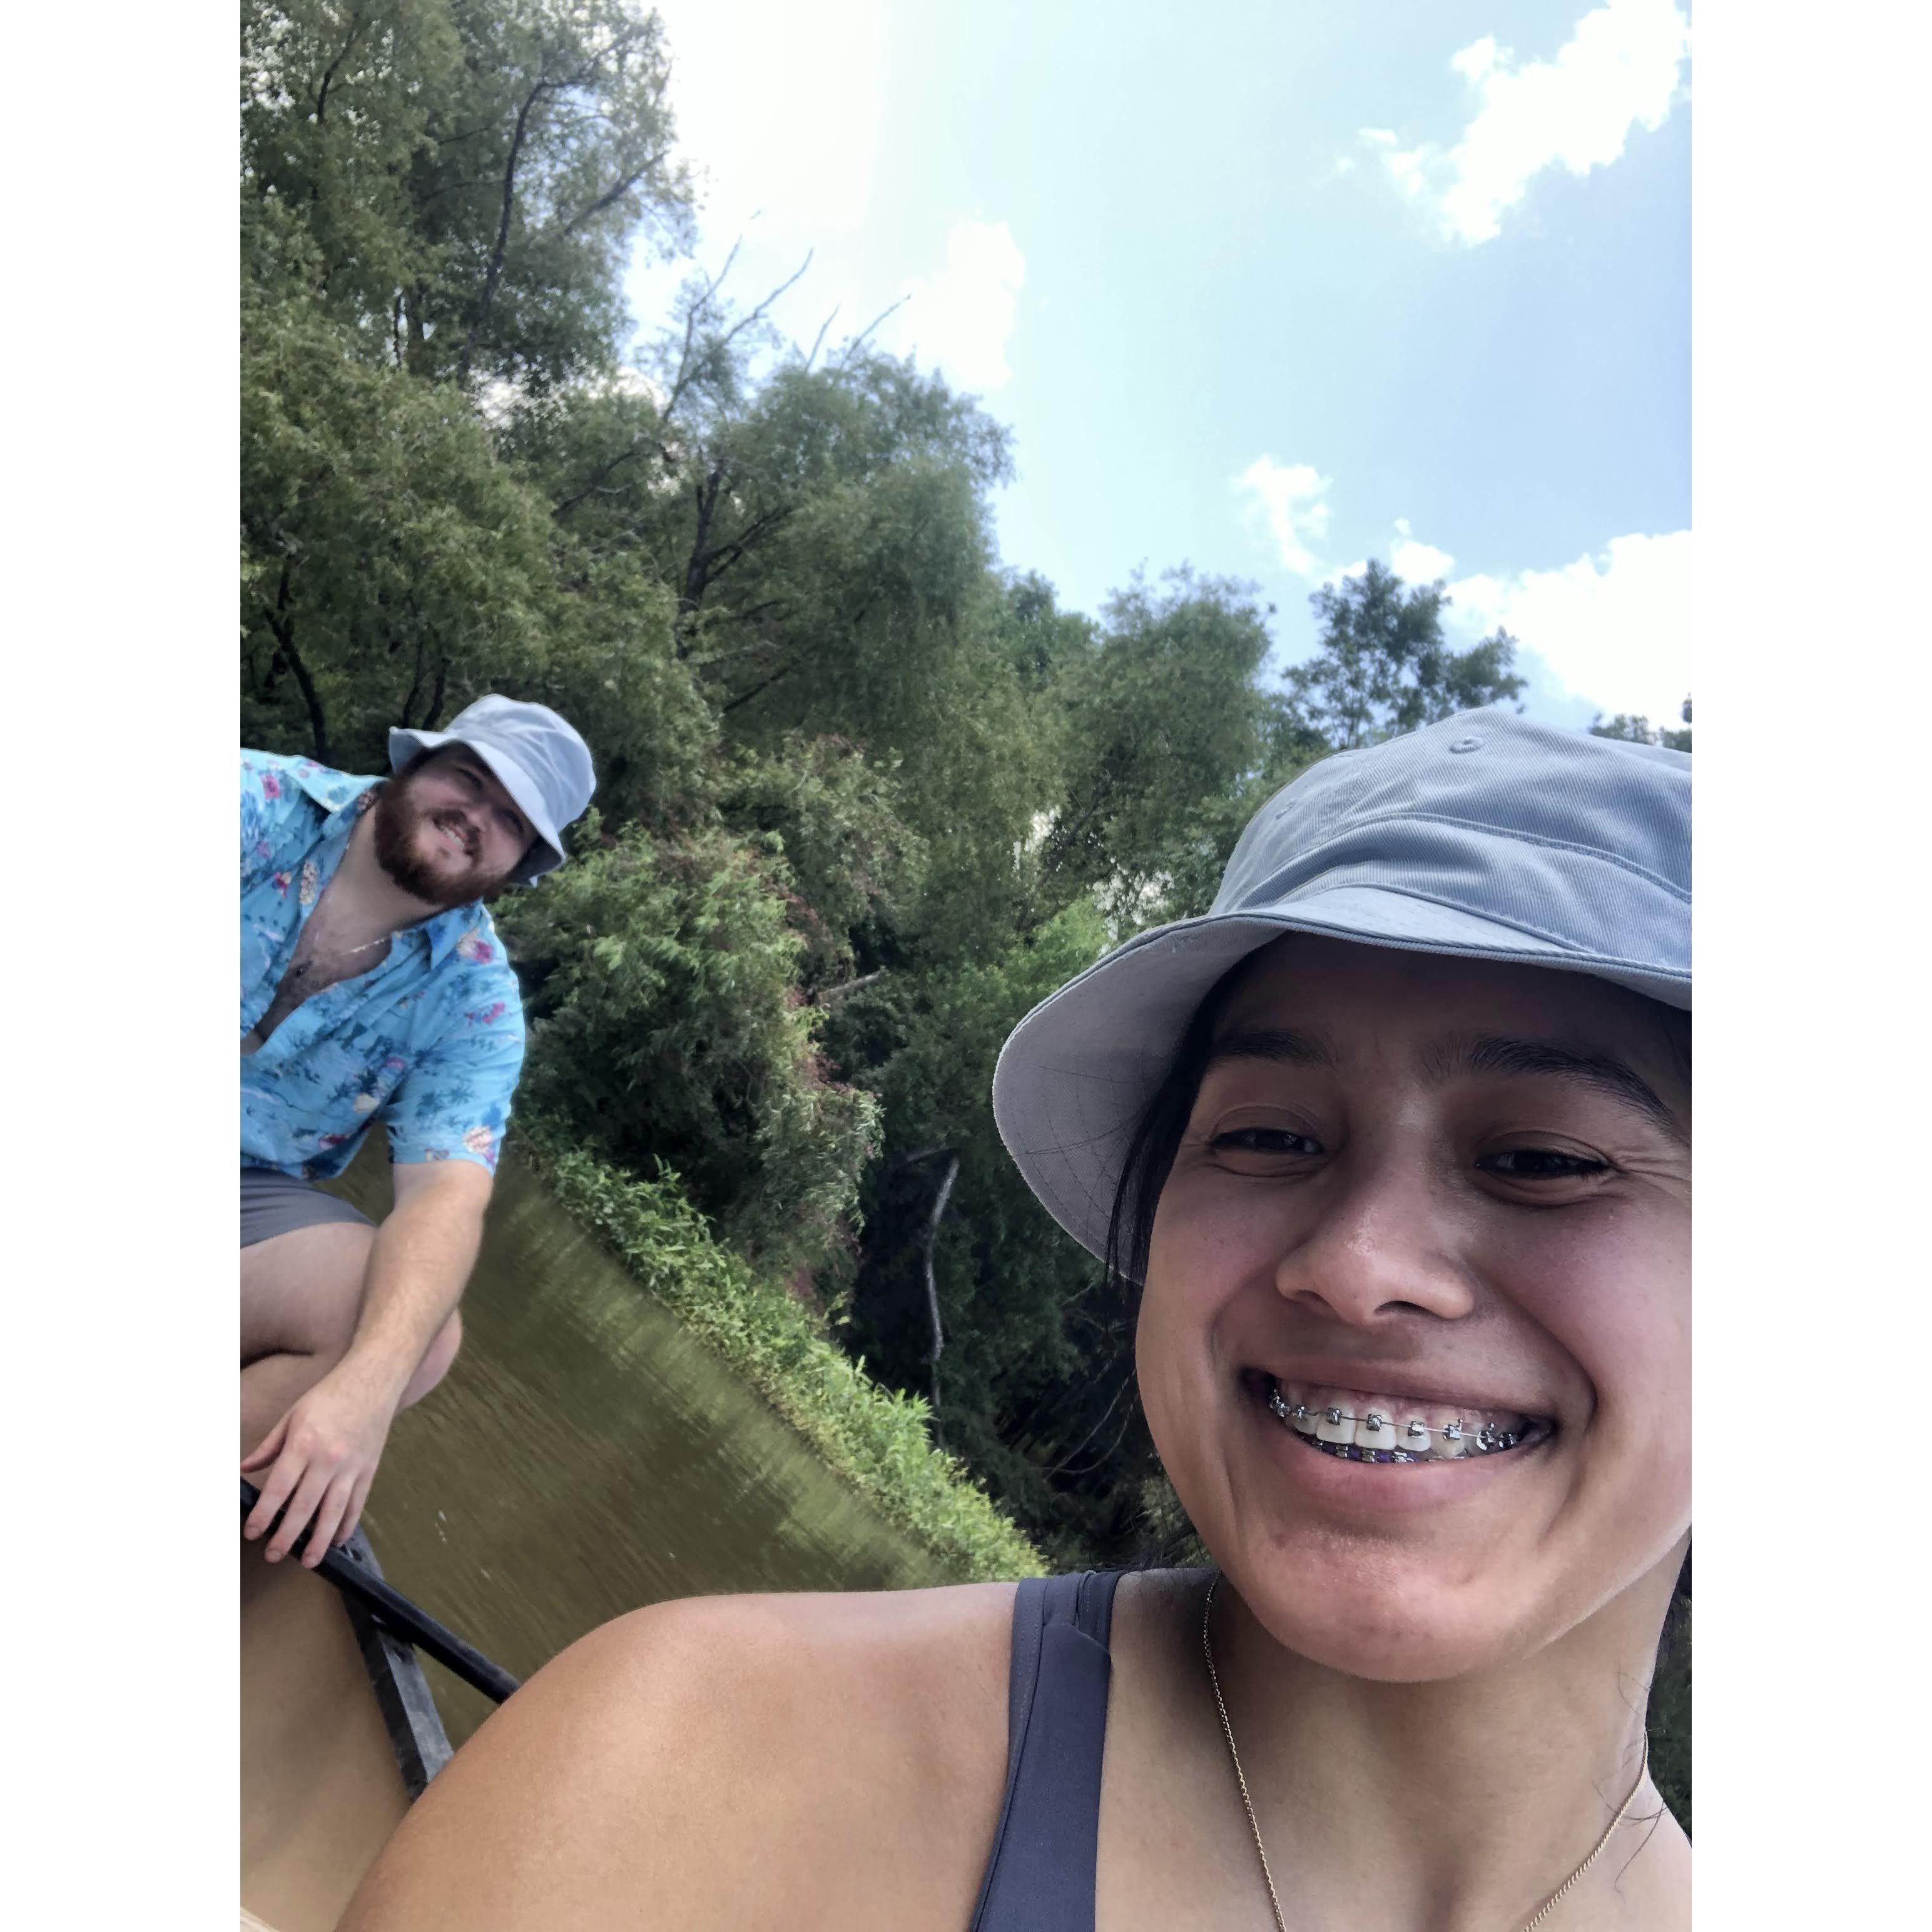 Our second time on a canoe together. The first was not a good time so canoeing has been redeemed for Liz.